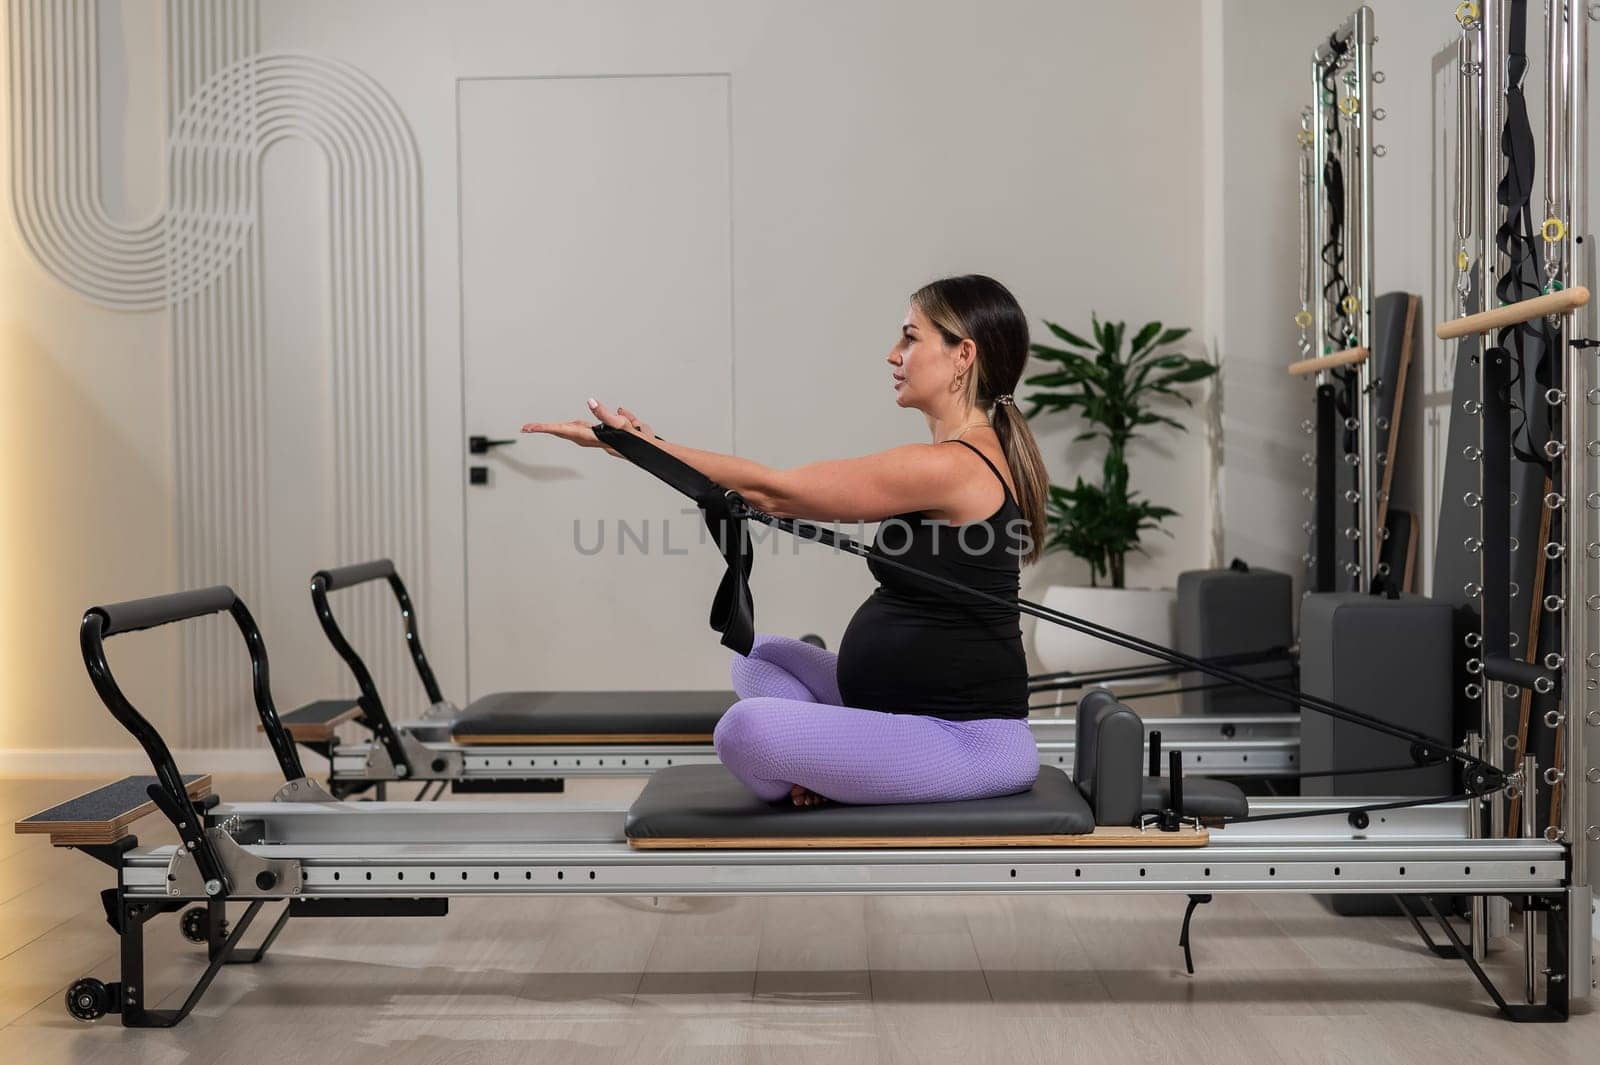 Pregnant woman doing Pilates exercises on a reformer machine. by mrwed54